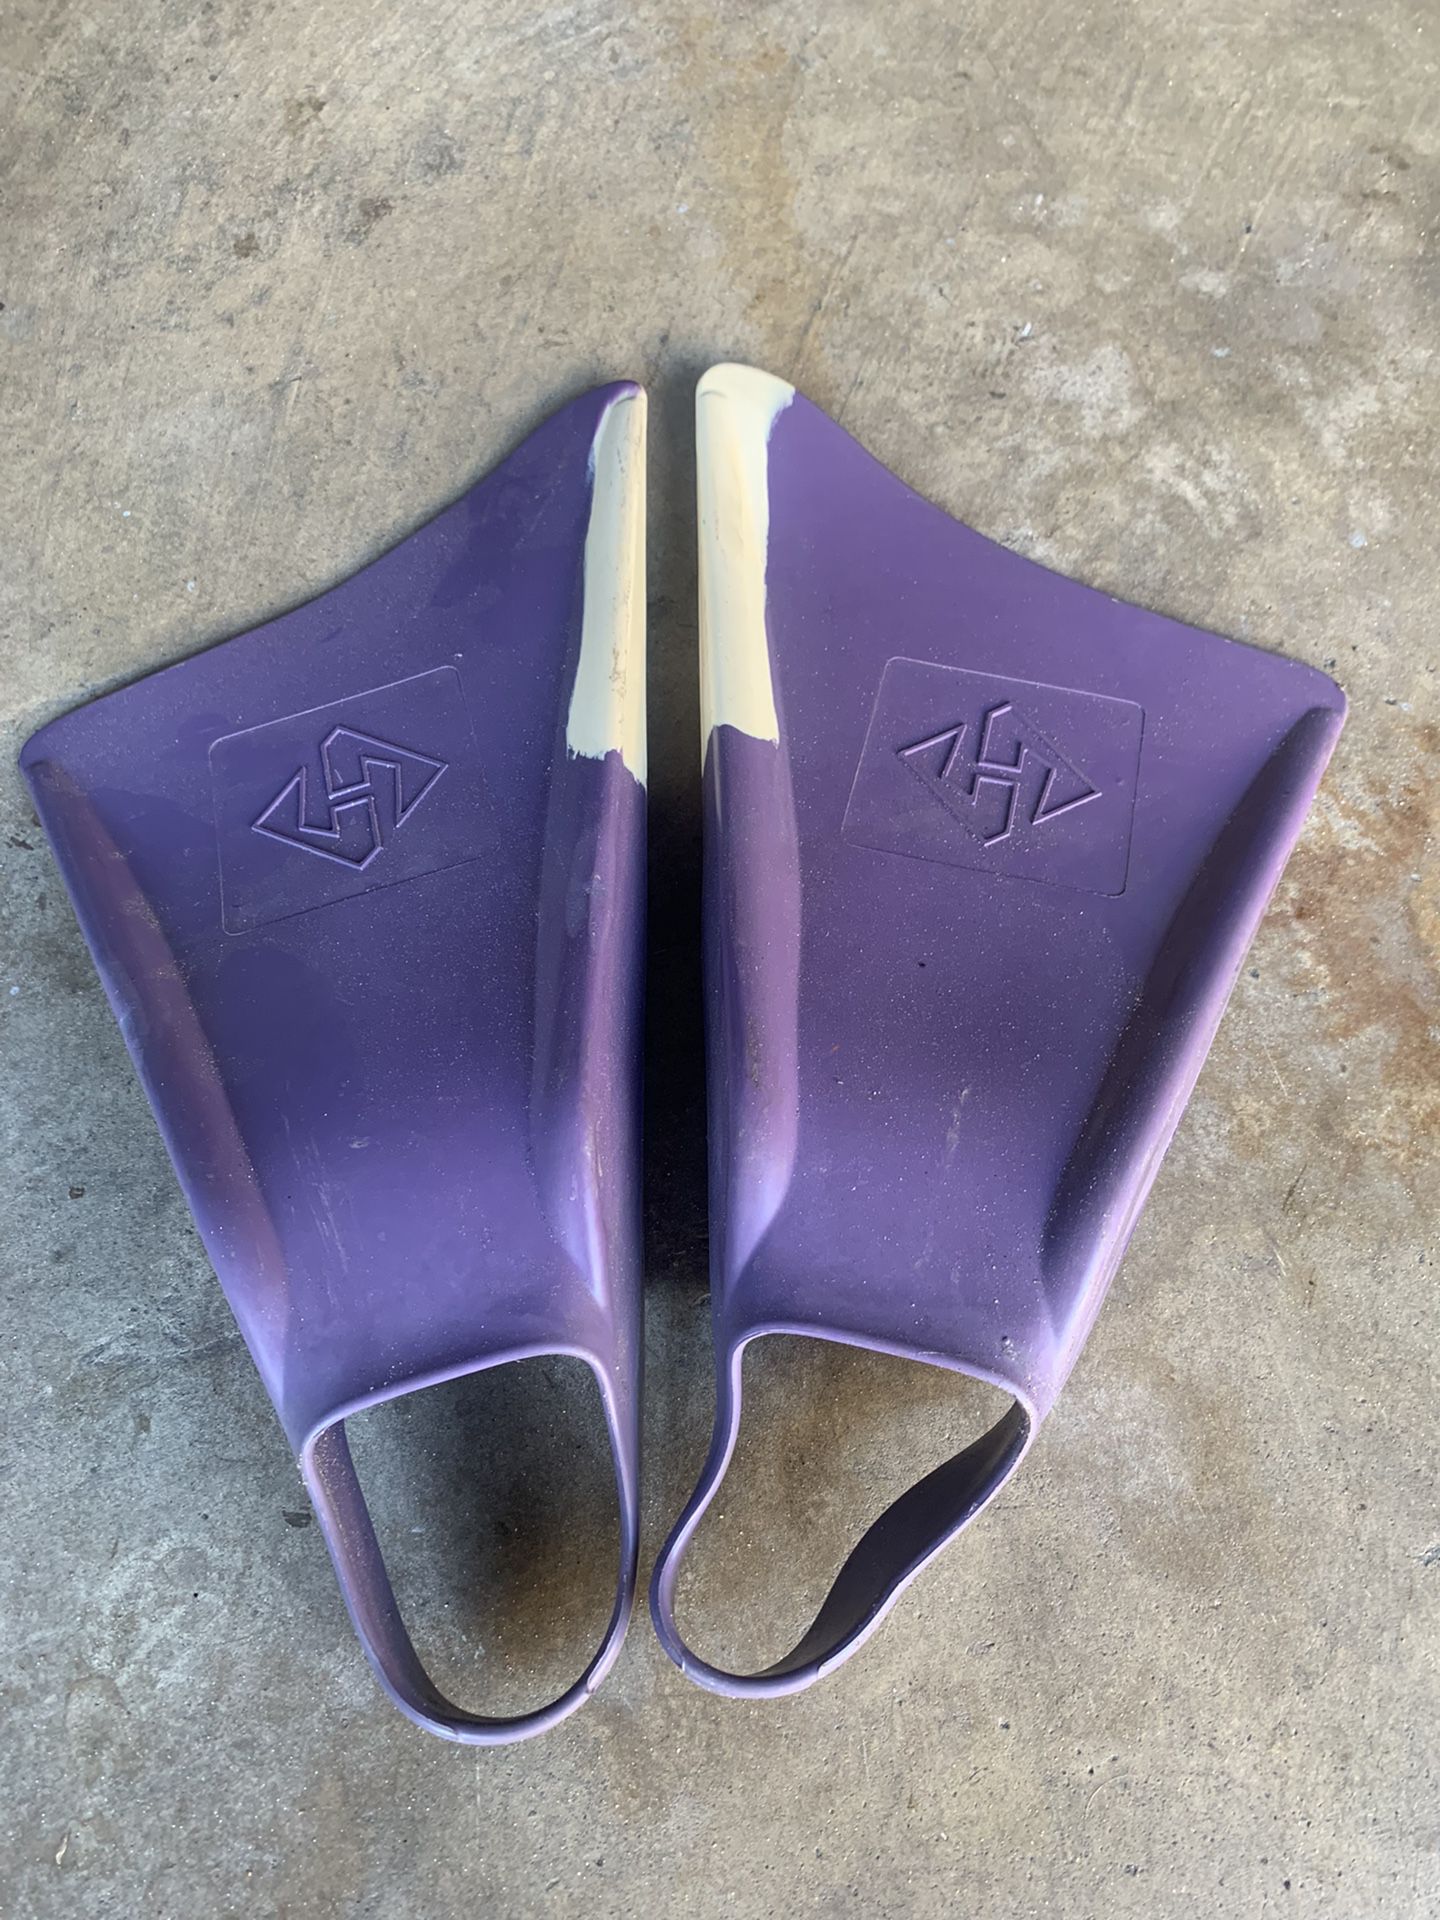 Fins For Boogie Boarding Or Body Surfing